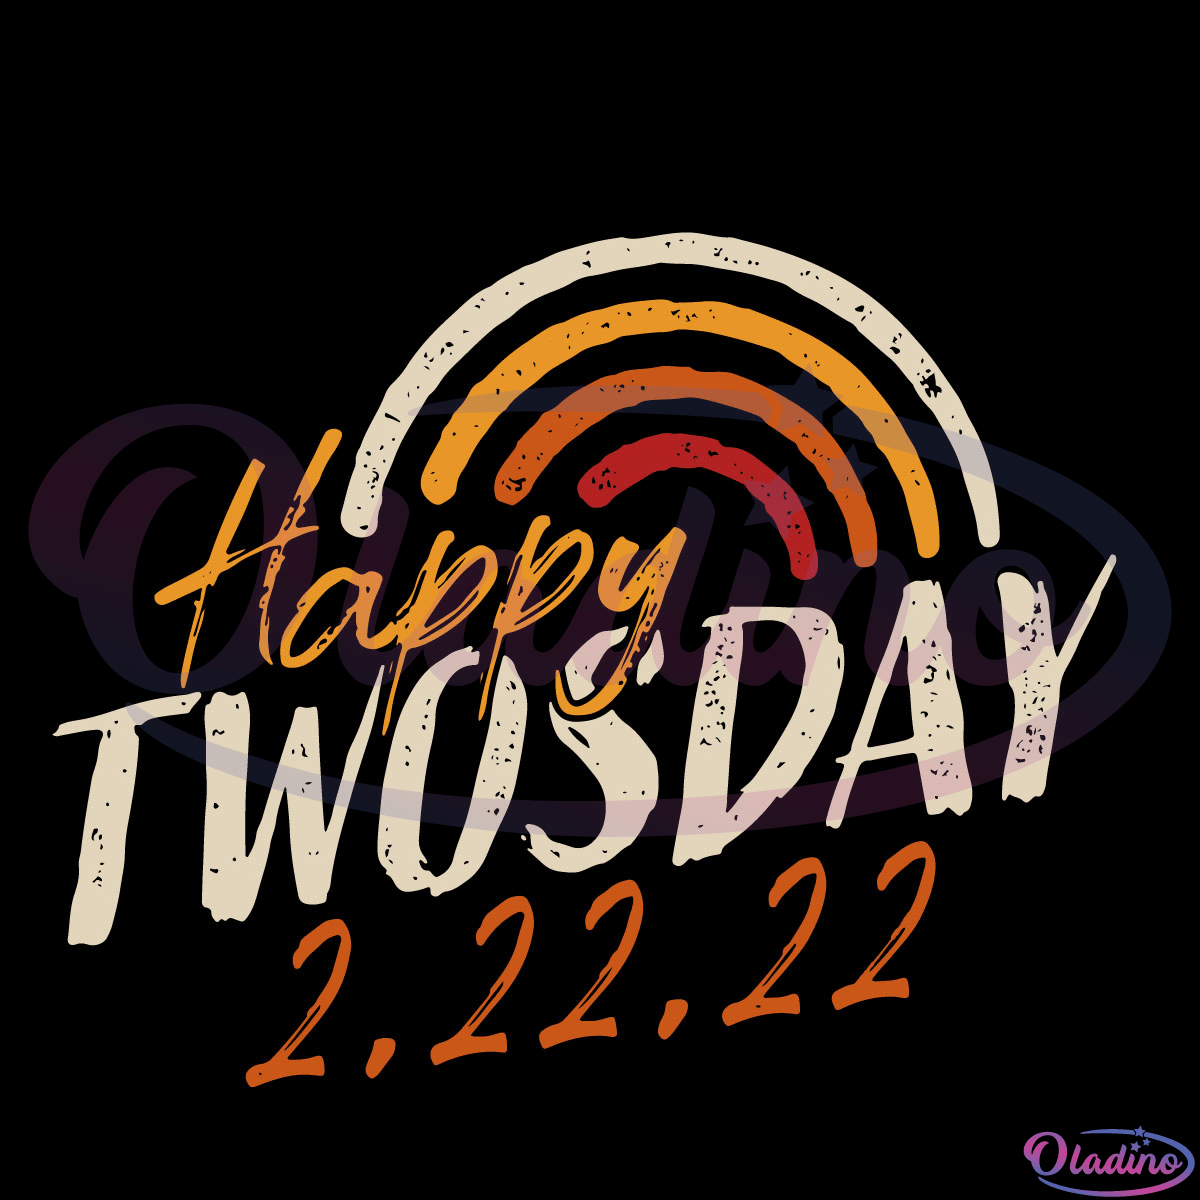 Happy Twosday 2.22.2022 SVG Digital File, Special Day 2022 Svg